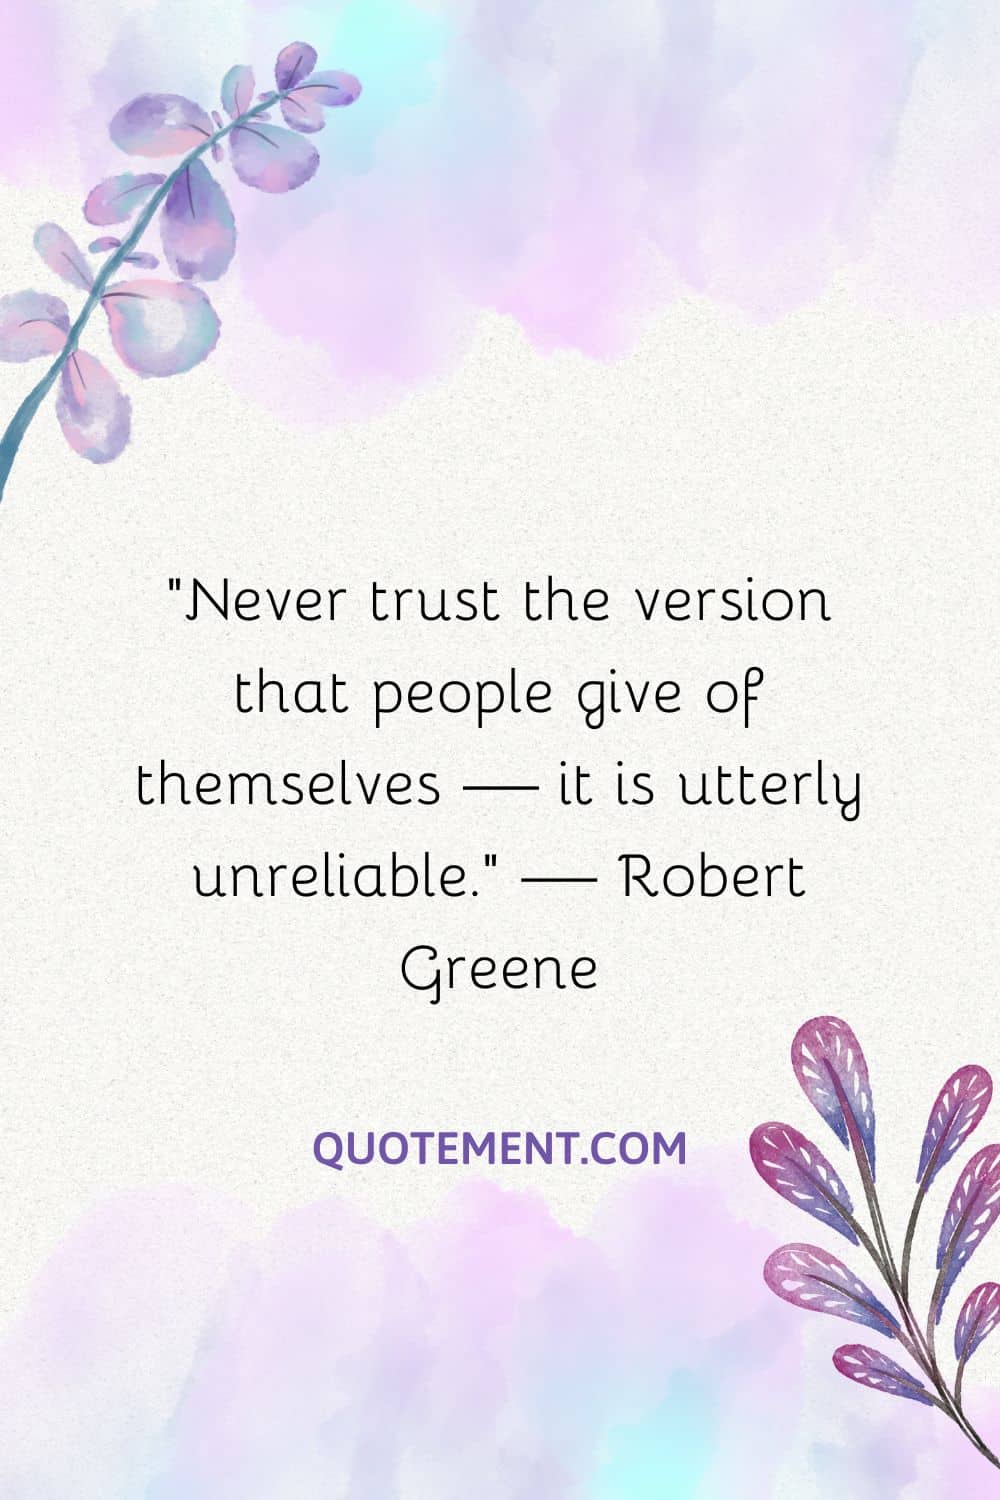 Never trust the version that people give of themselves — it is utterly unreliable.